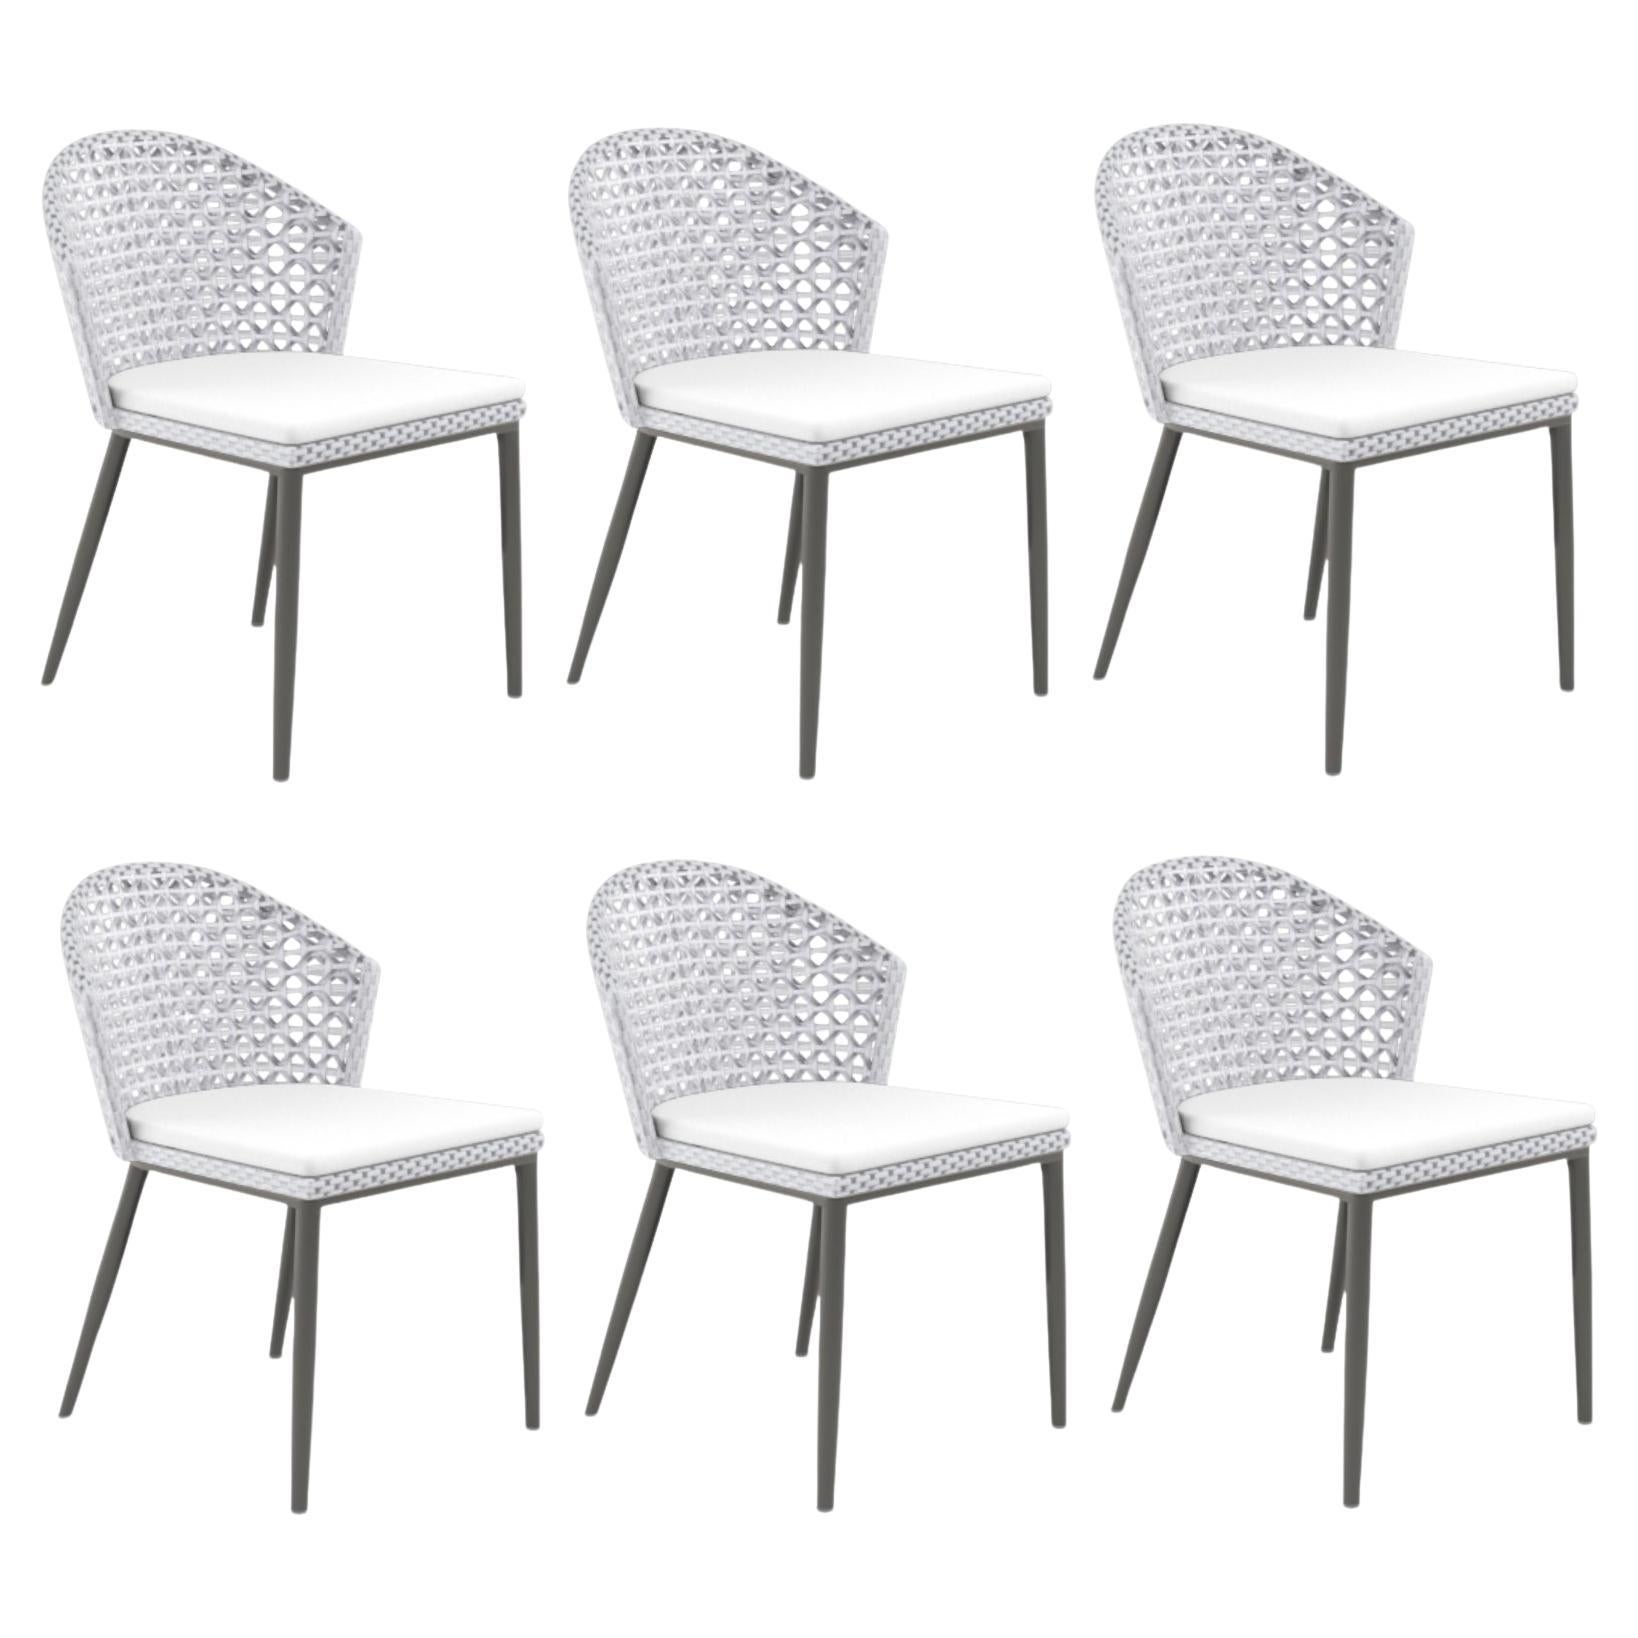 Outdoor Dining Chairs in Seashell Weather Resistant Wicker / Set of 6